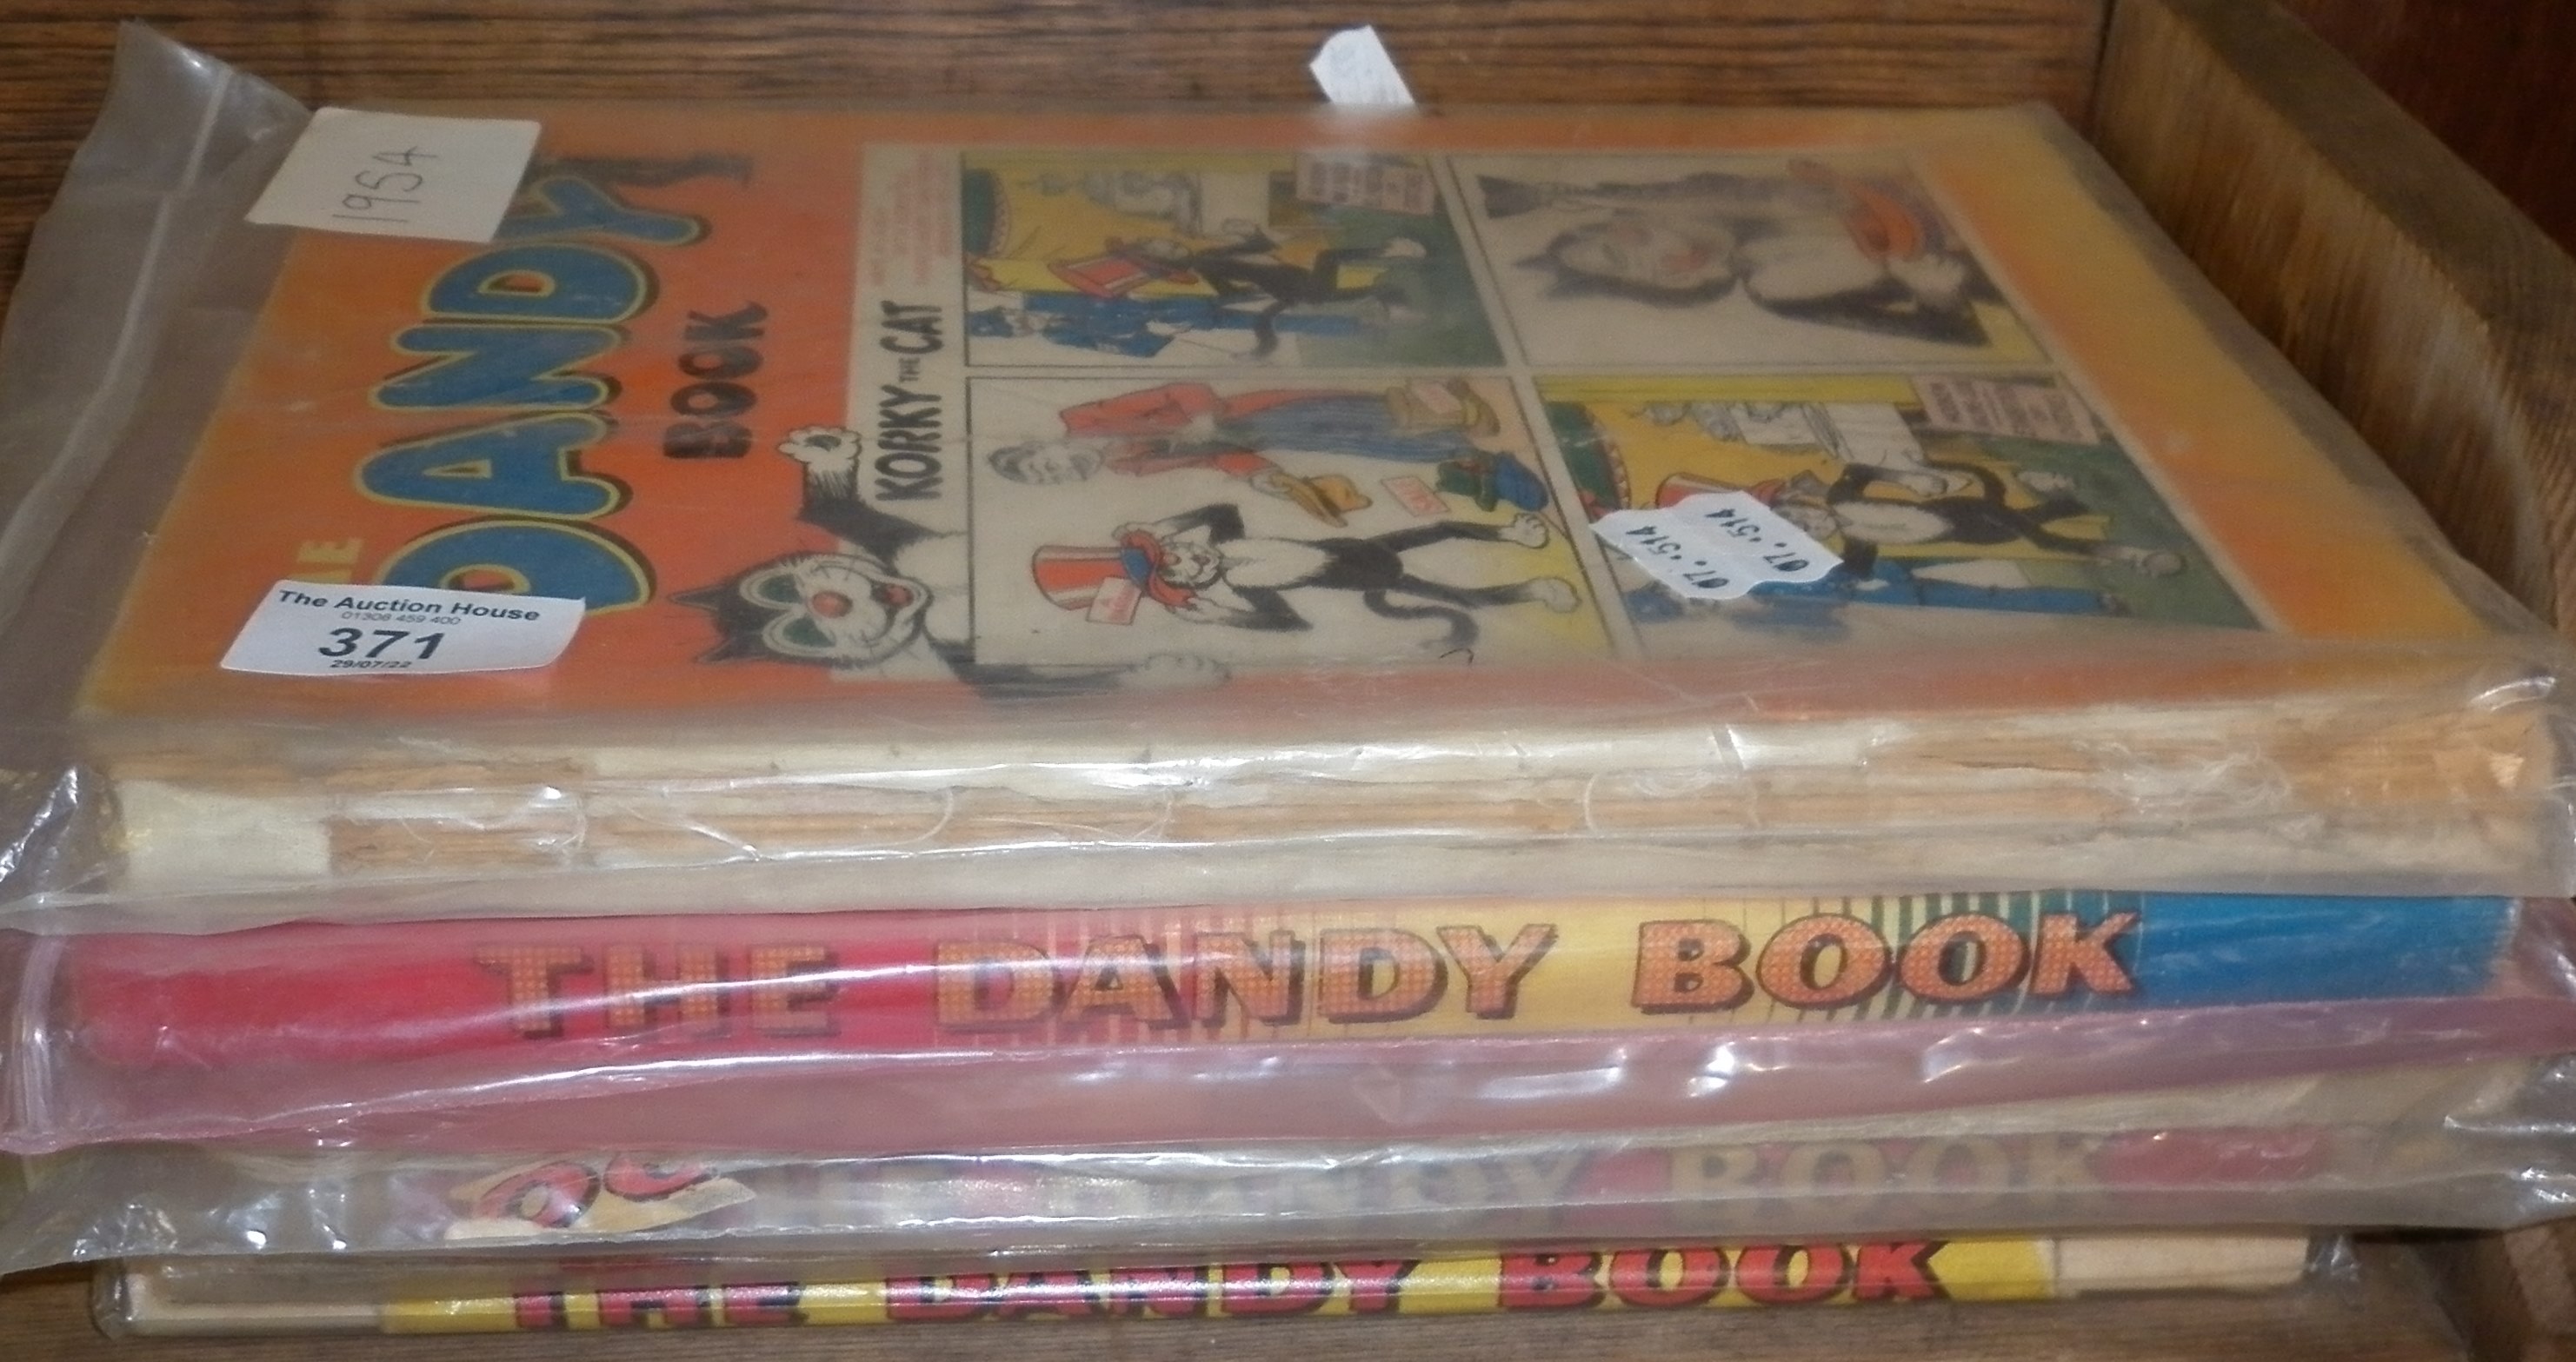 The Dandy Book comic annuals -1954, 1955, 1956, 1957 and 1958